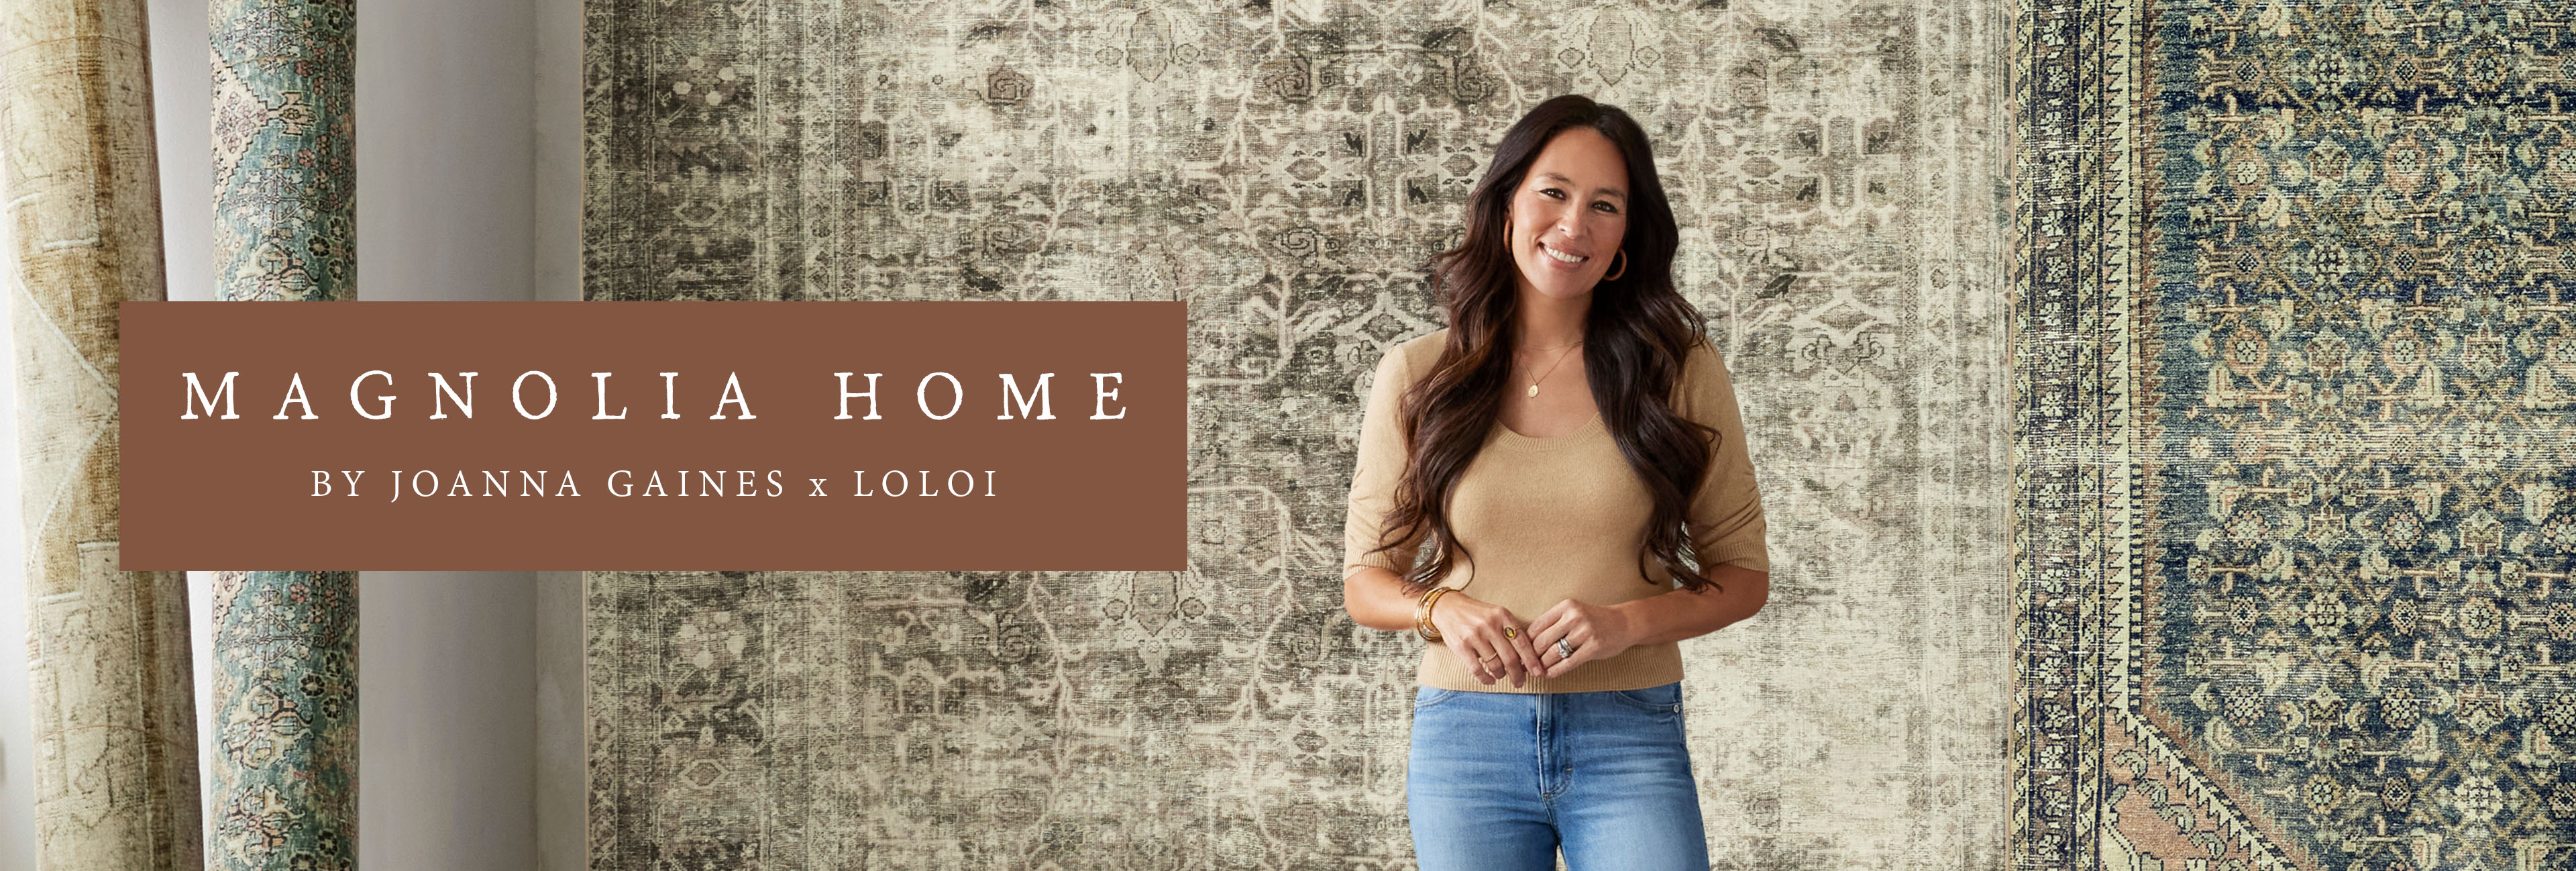 Joanna gaines stands in front of rugs on a wall. Magnolia home joanna gaines x loloi